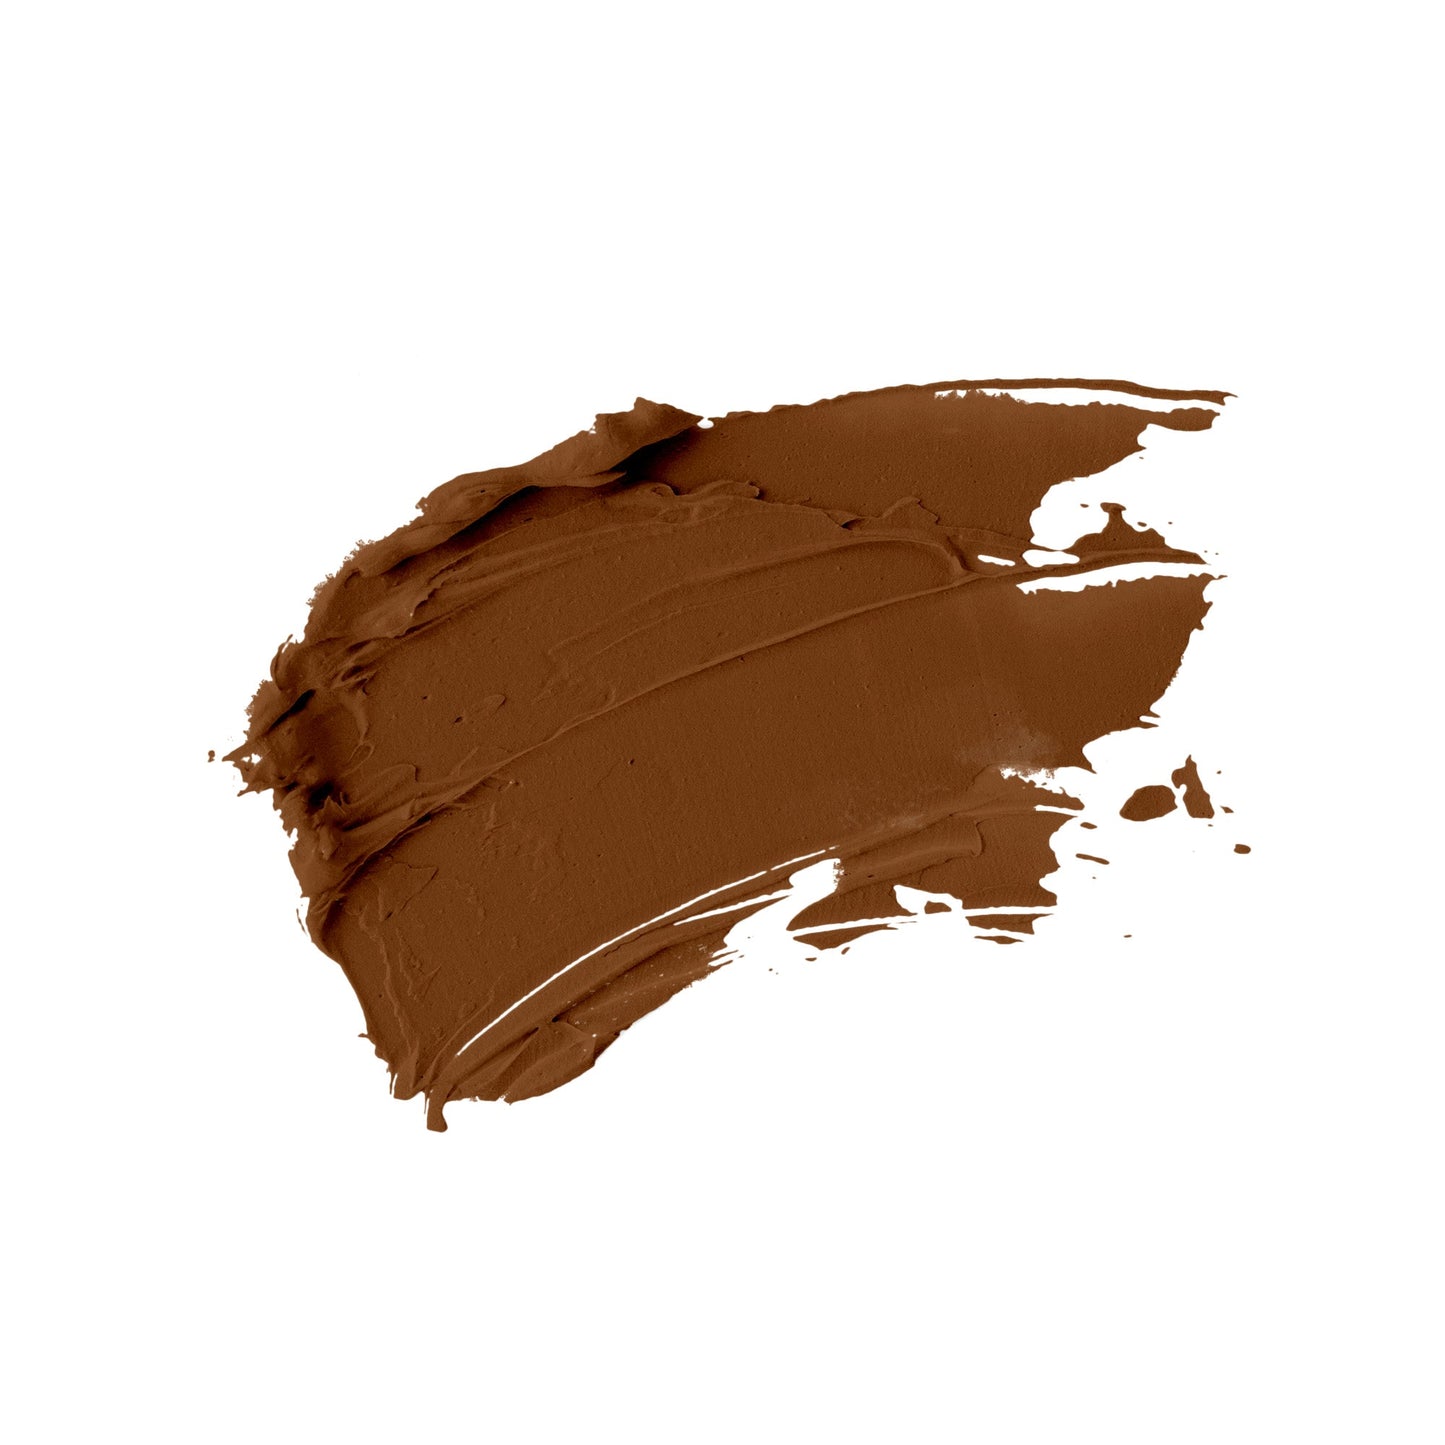 Swatch of sable tone of an oil free natural non-toxic liquid foundation